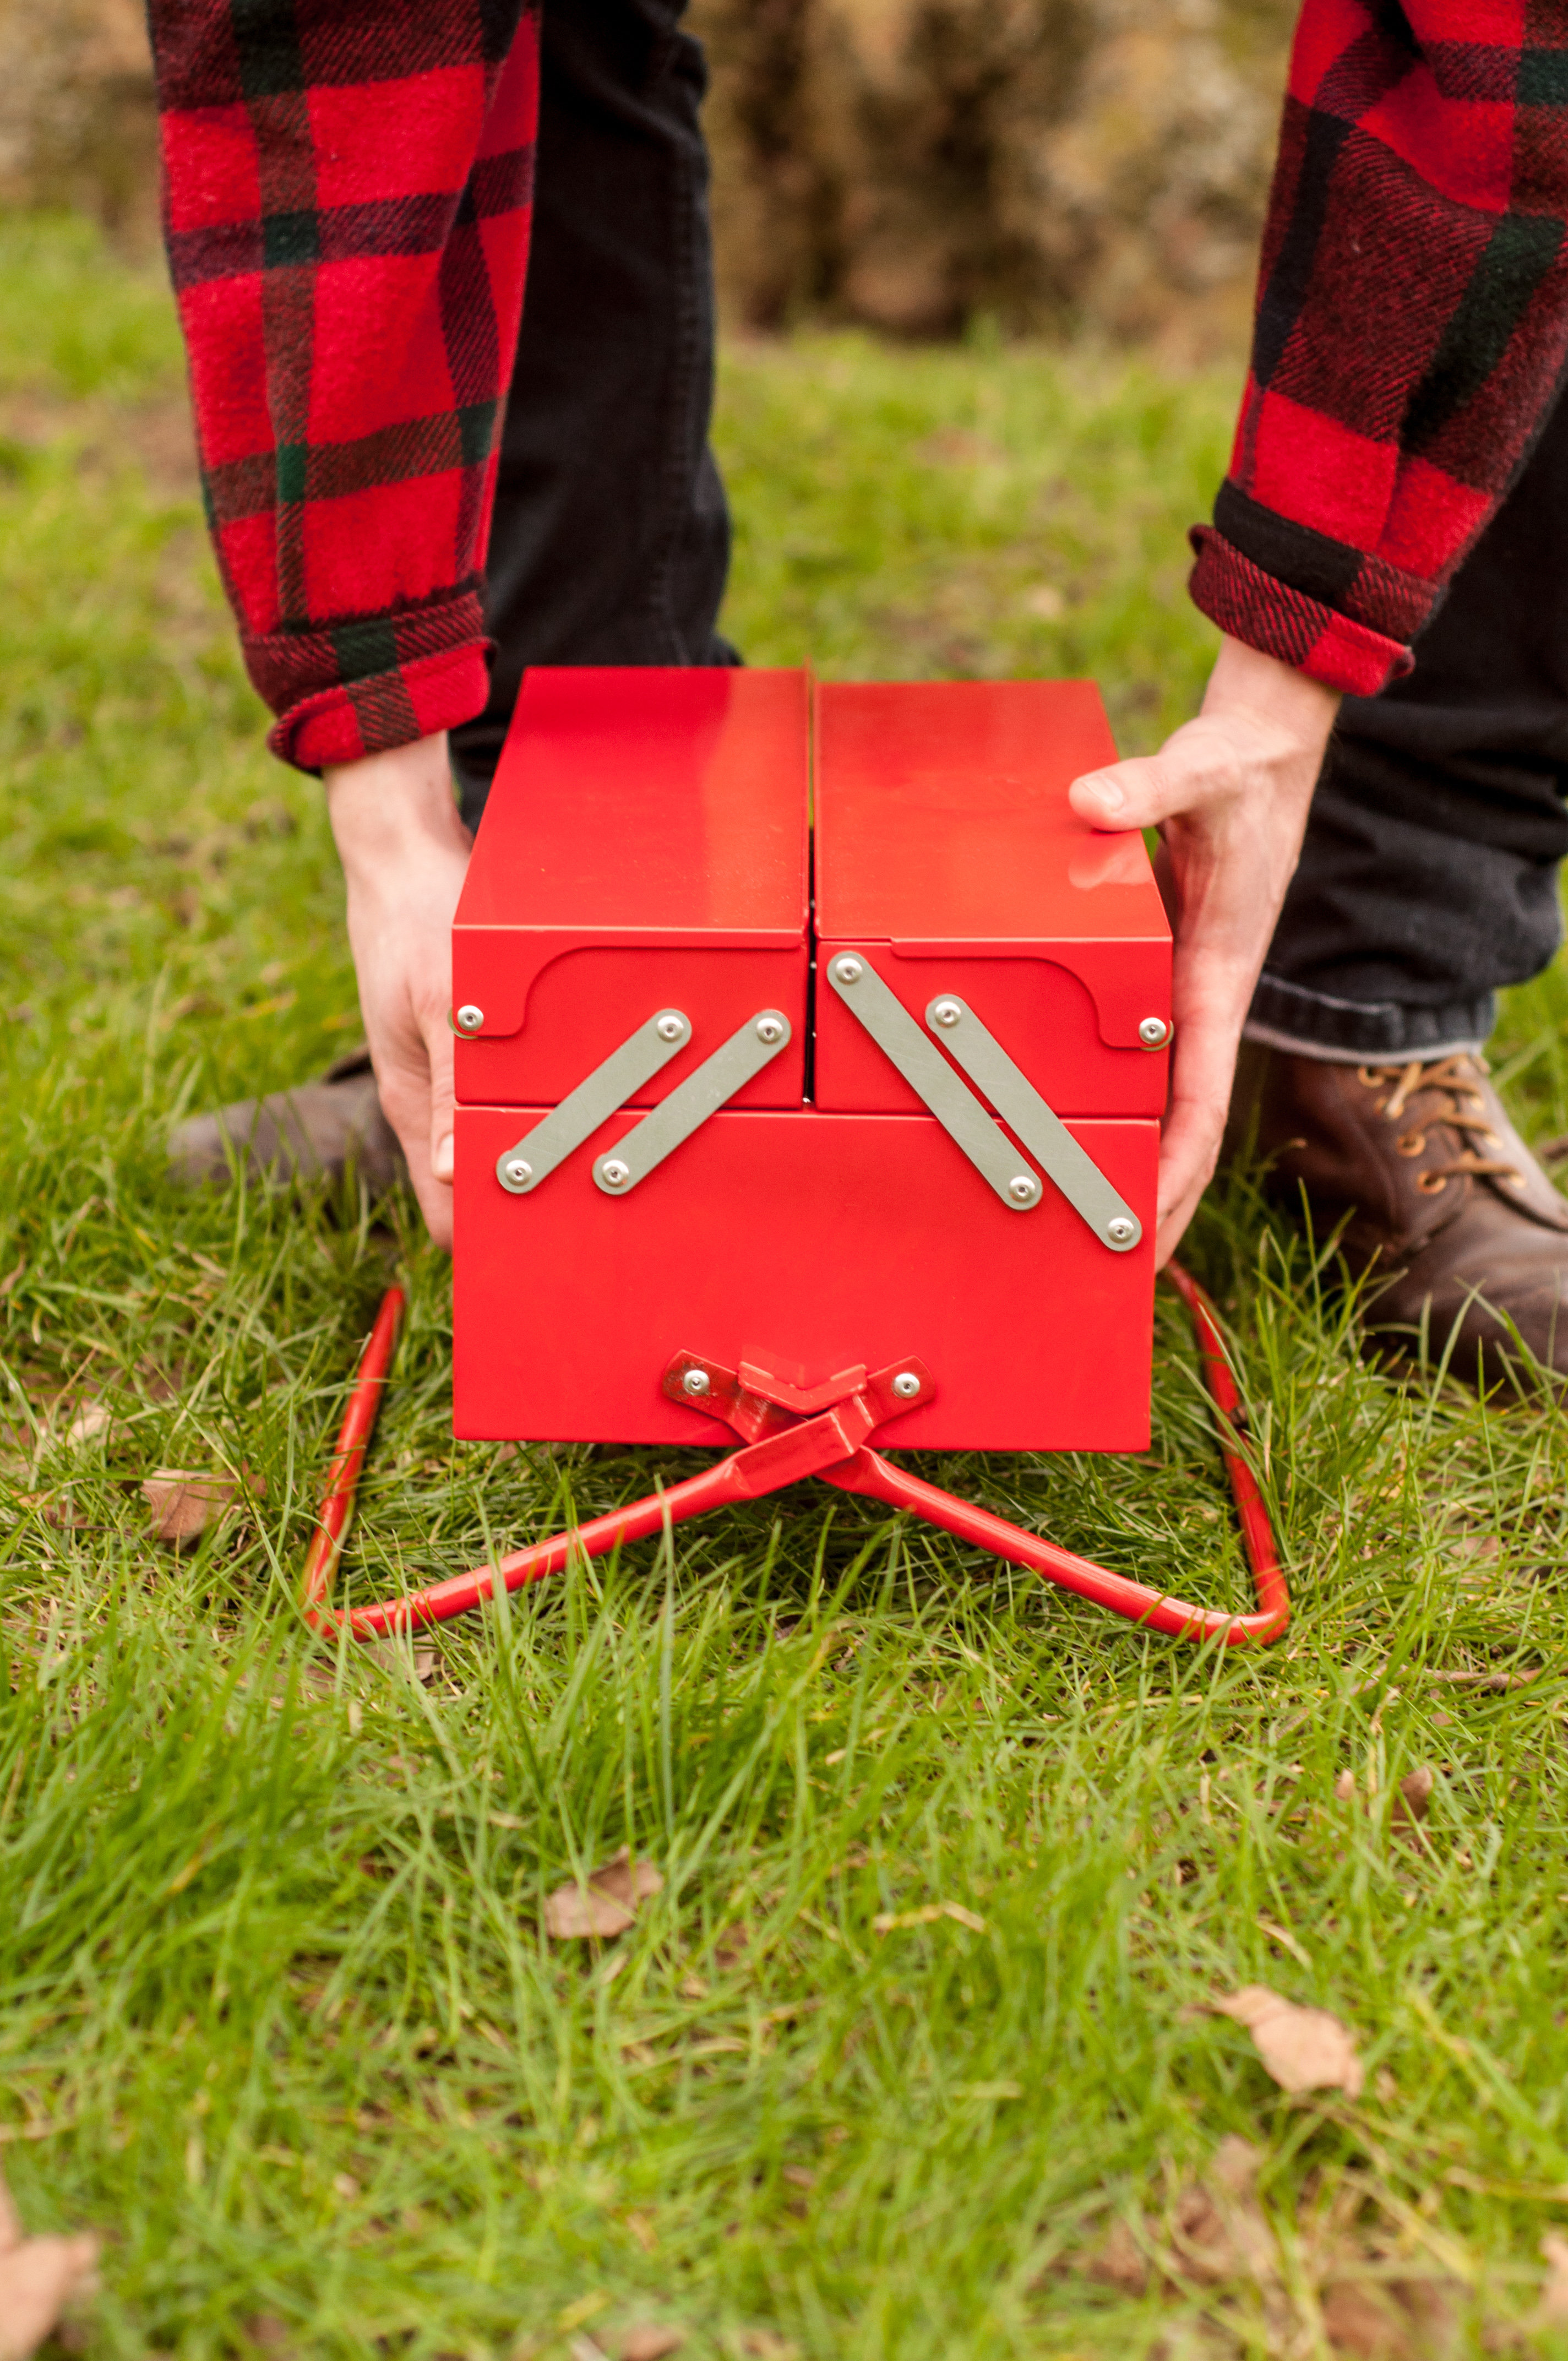 This Ordinary Looking Toolbox Is Actually A Portable BBQ Grill